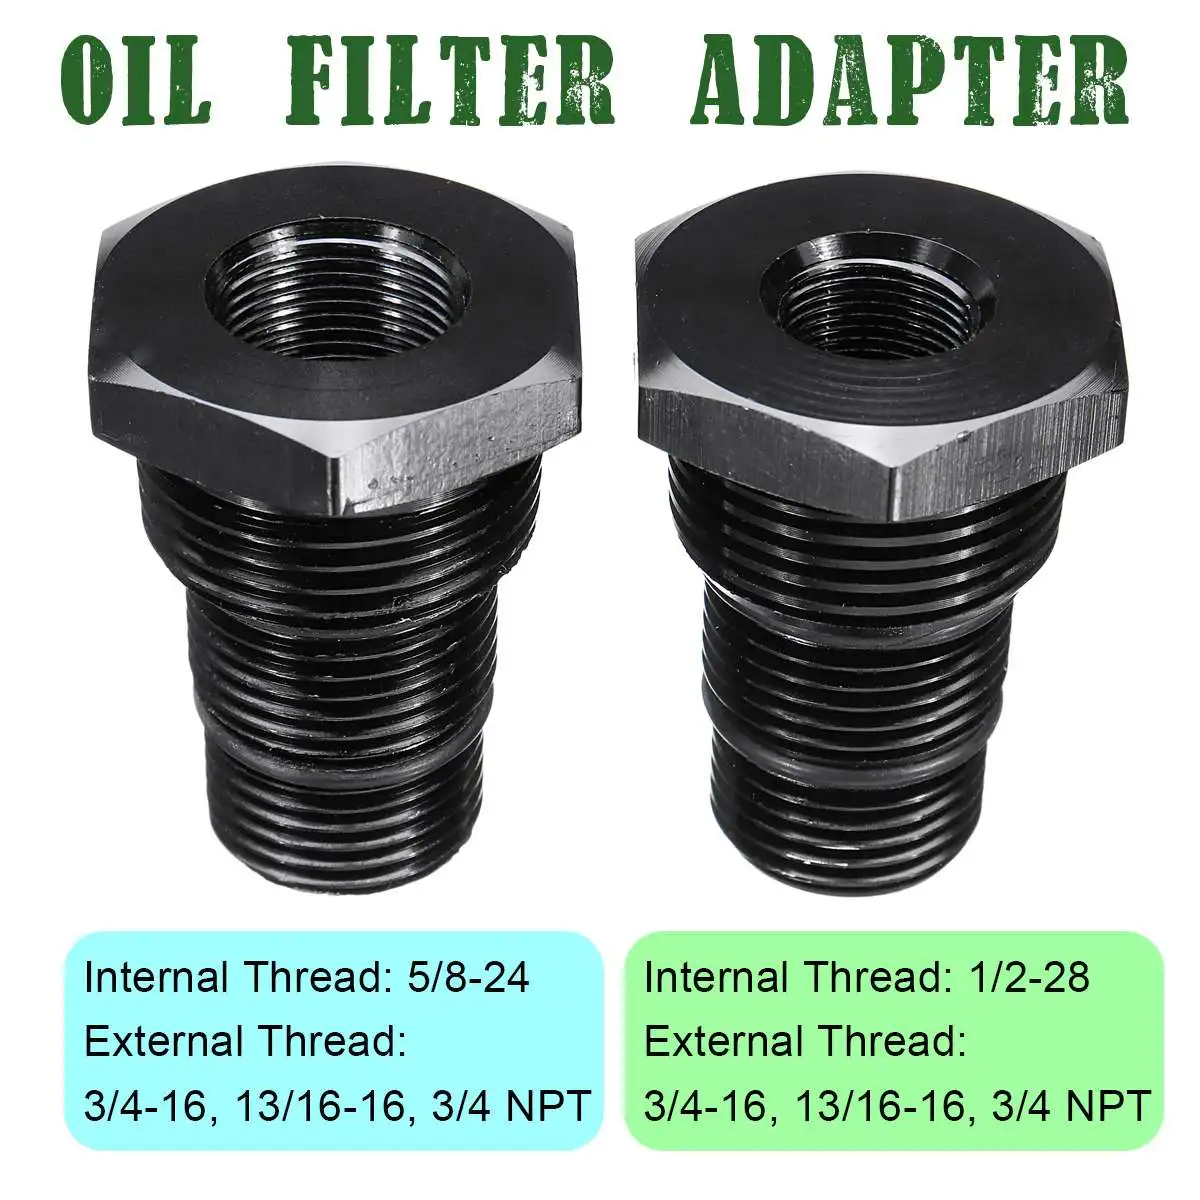 Details about   1/2-28 to 3/4-16 x 2.5 DIA Automotive threaded oil filter adapter 